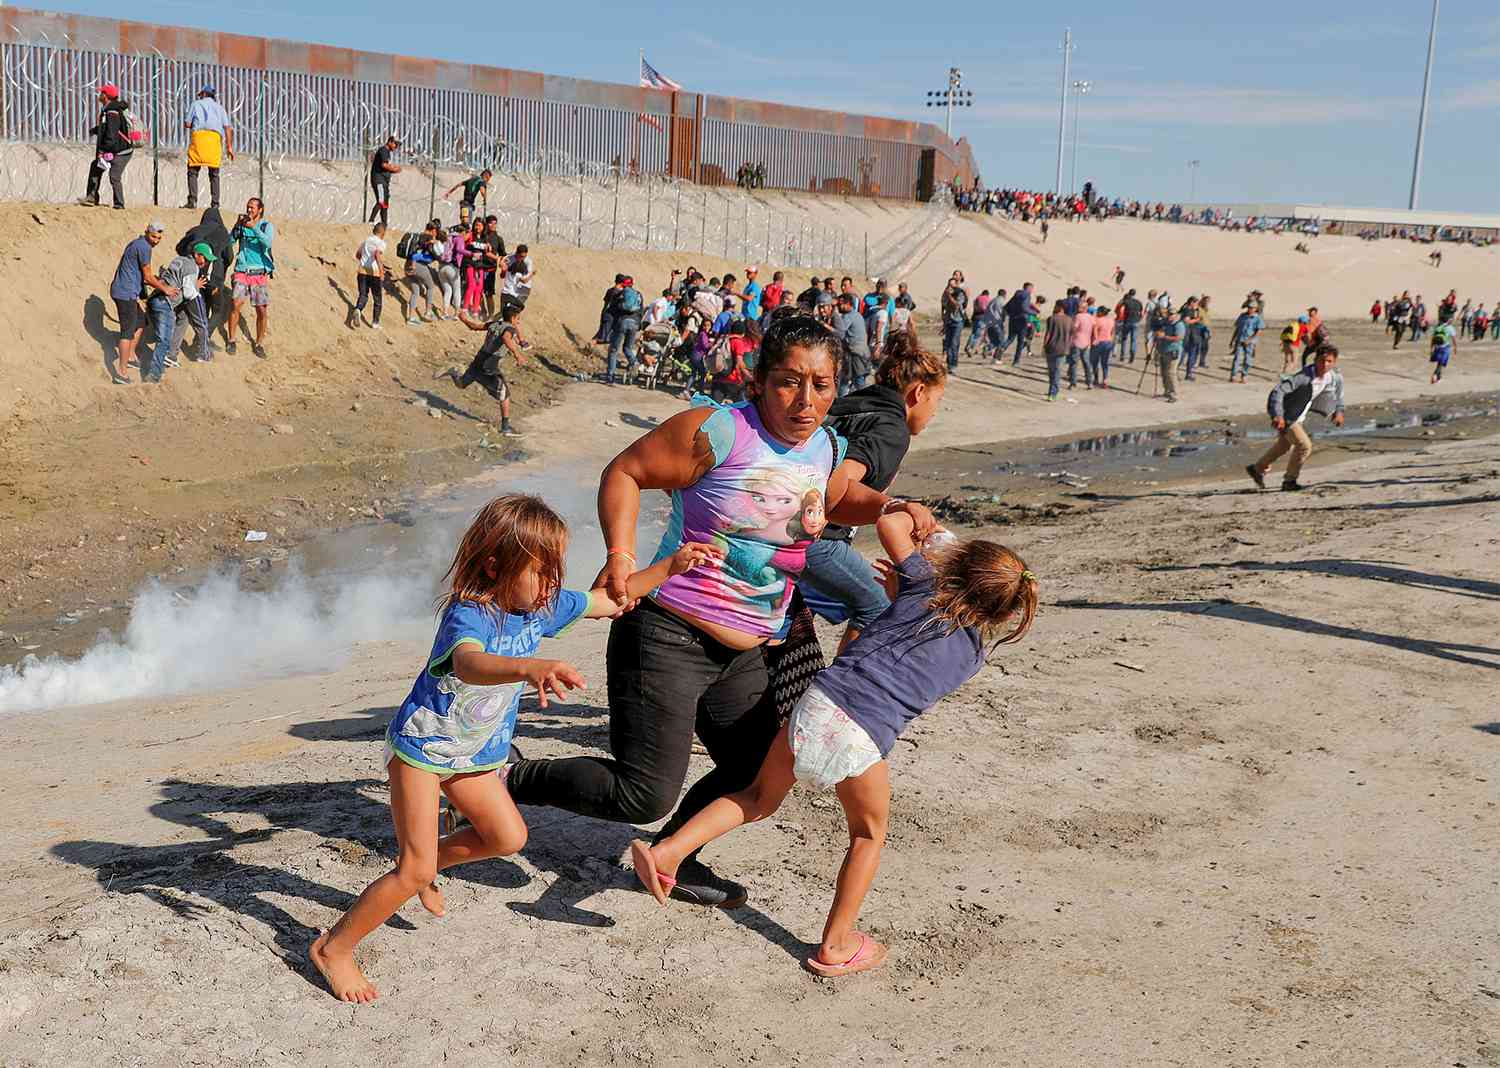 A migrant family, part of a caravan of thousands traveling from Central America en route to the United States, run away from tear gas in front of the border wall between the U.S and Mexico in Tijuana